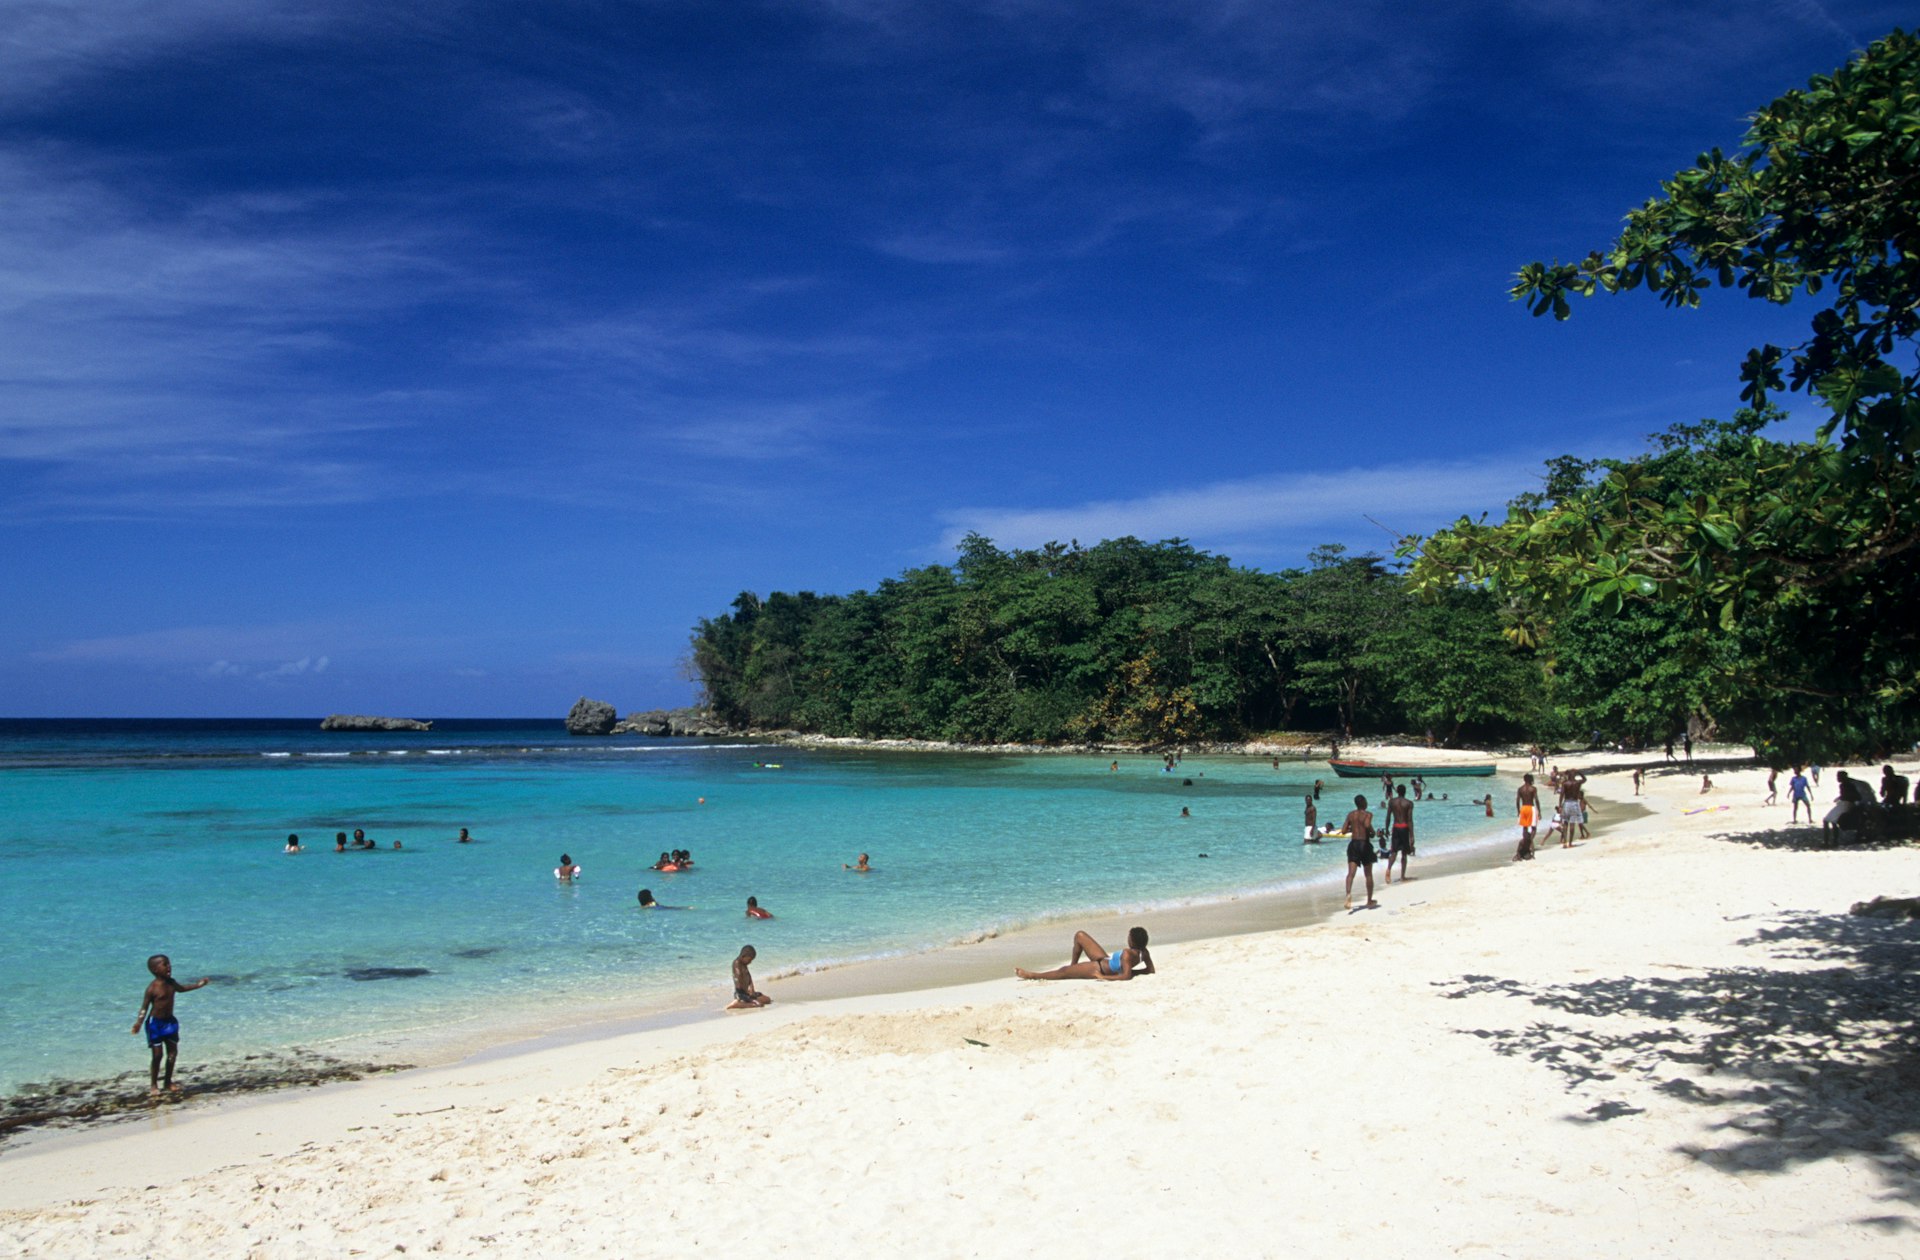 People lounging on the white sand beach and swimming in turquoise water at Winnifred Bay in Port Antonio, Jamaica 